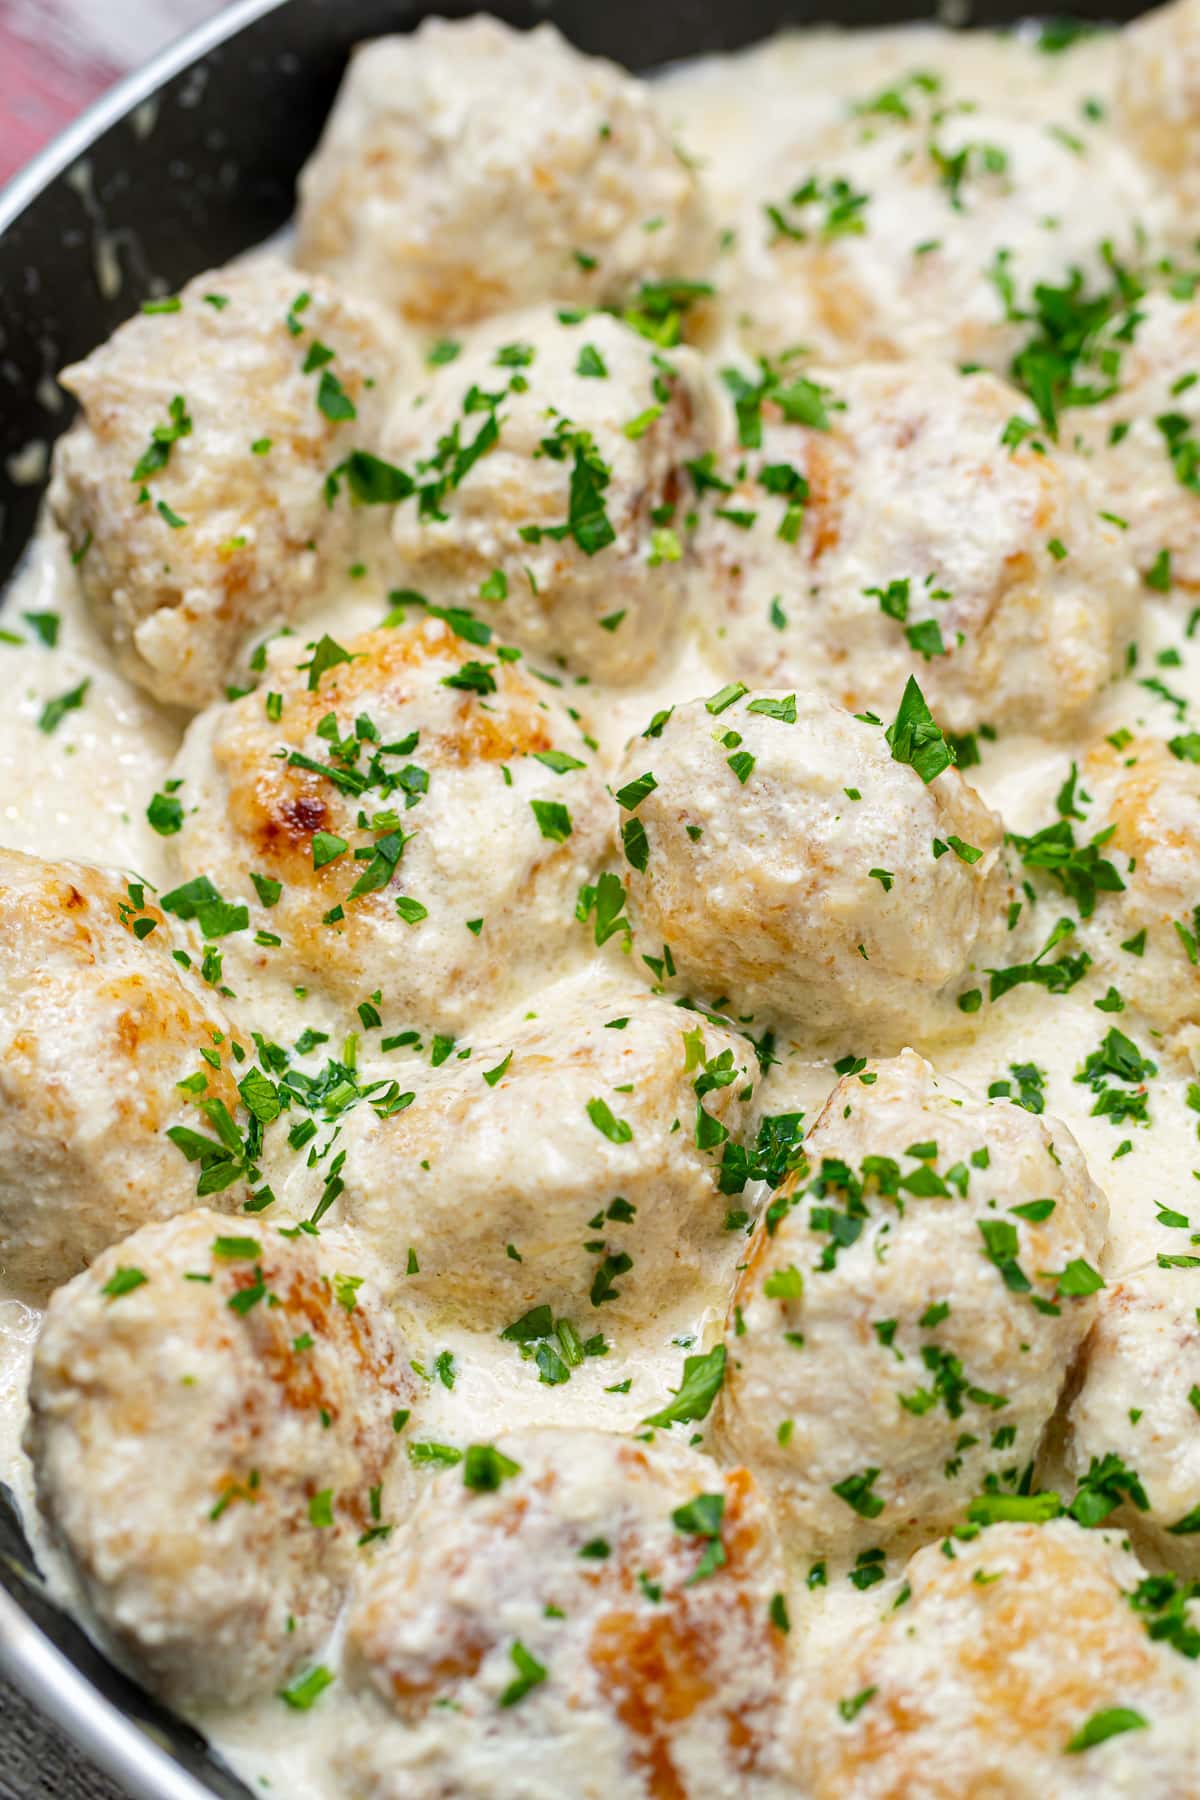 Final dish of meatballs in white sauce garnished with parsley in a pan.